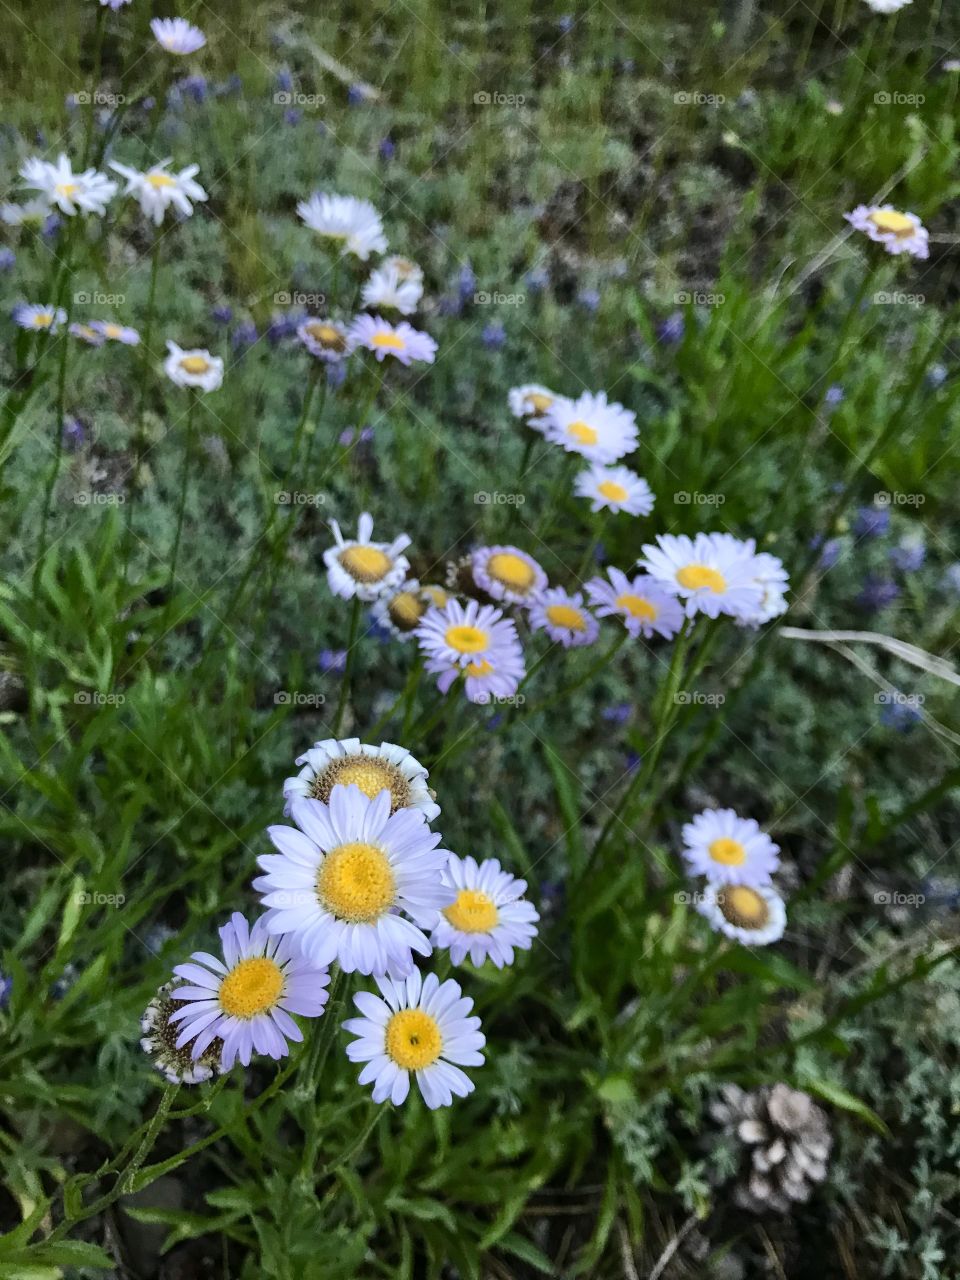 Some pretty flowers in a meadow 